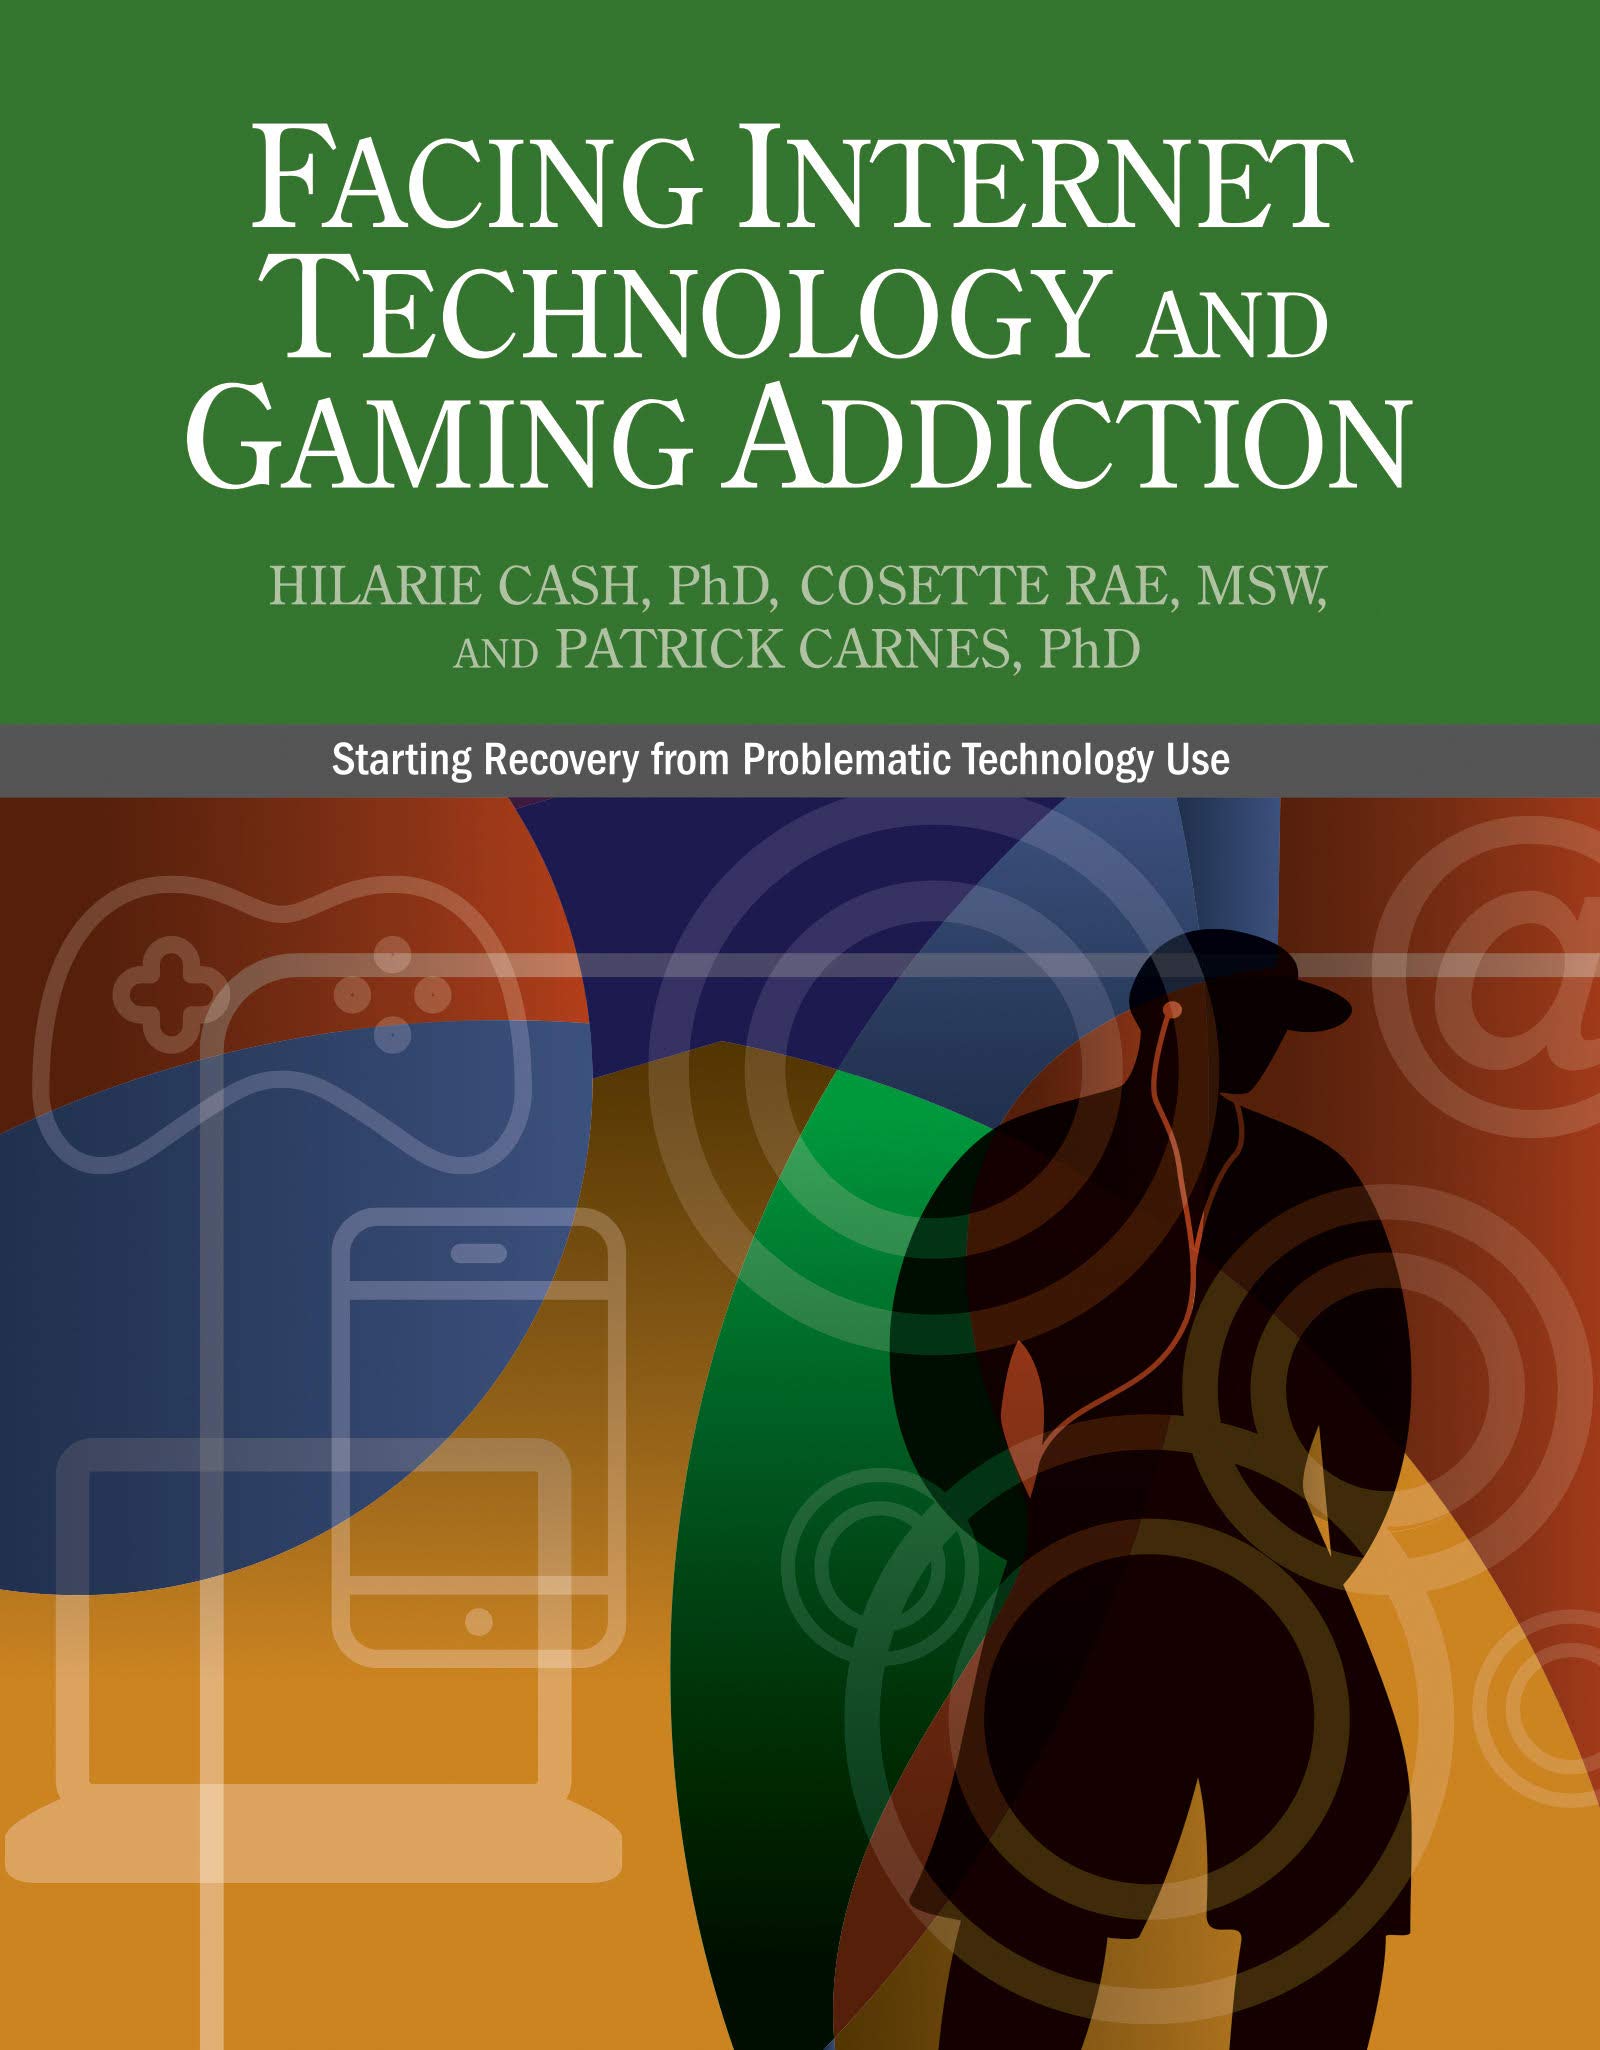 Facing Internet Technology and Gaming Addiction by Hilarie Cash